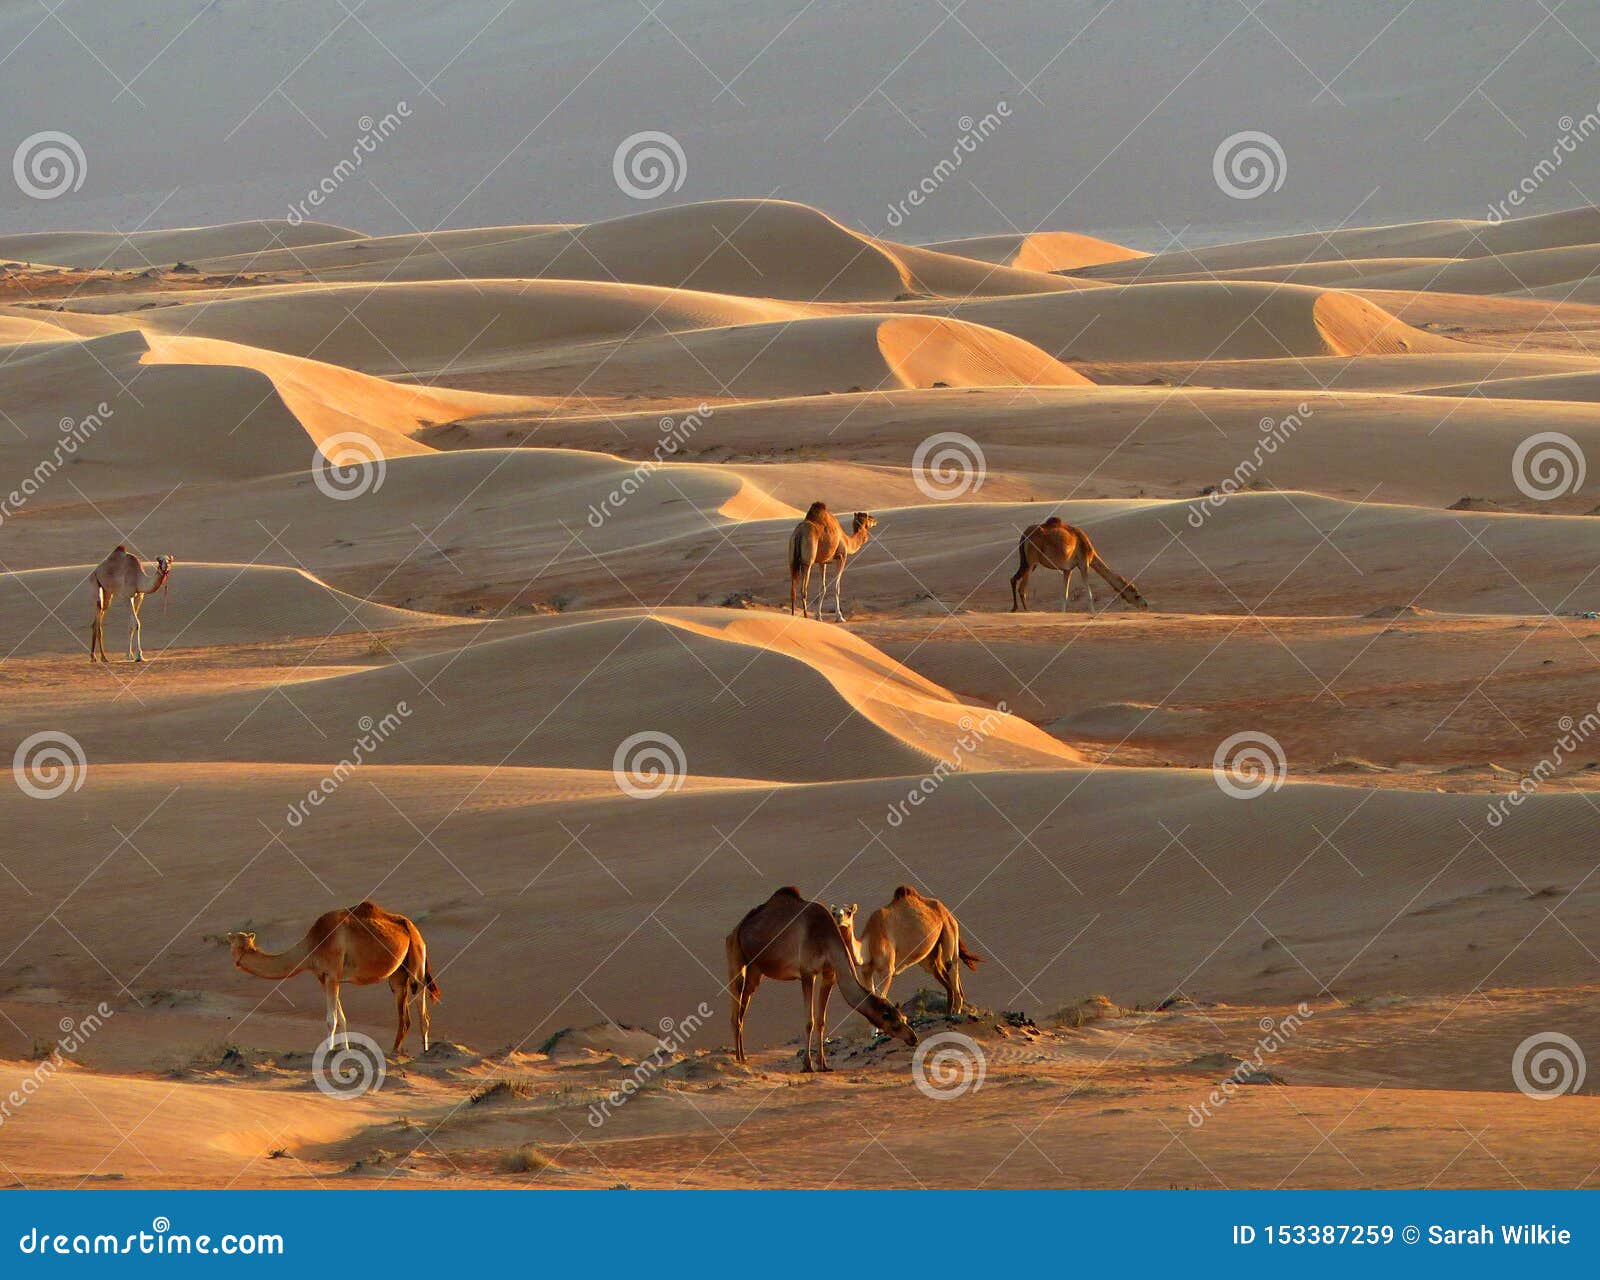 sand dunes and camels, wahiba sands, oman